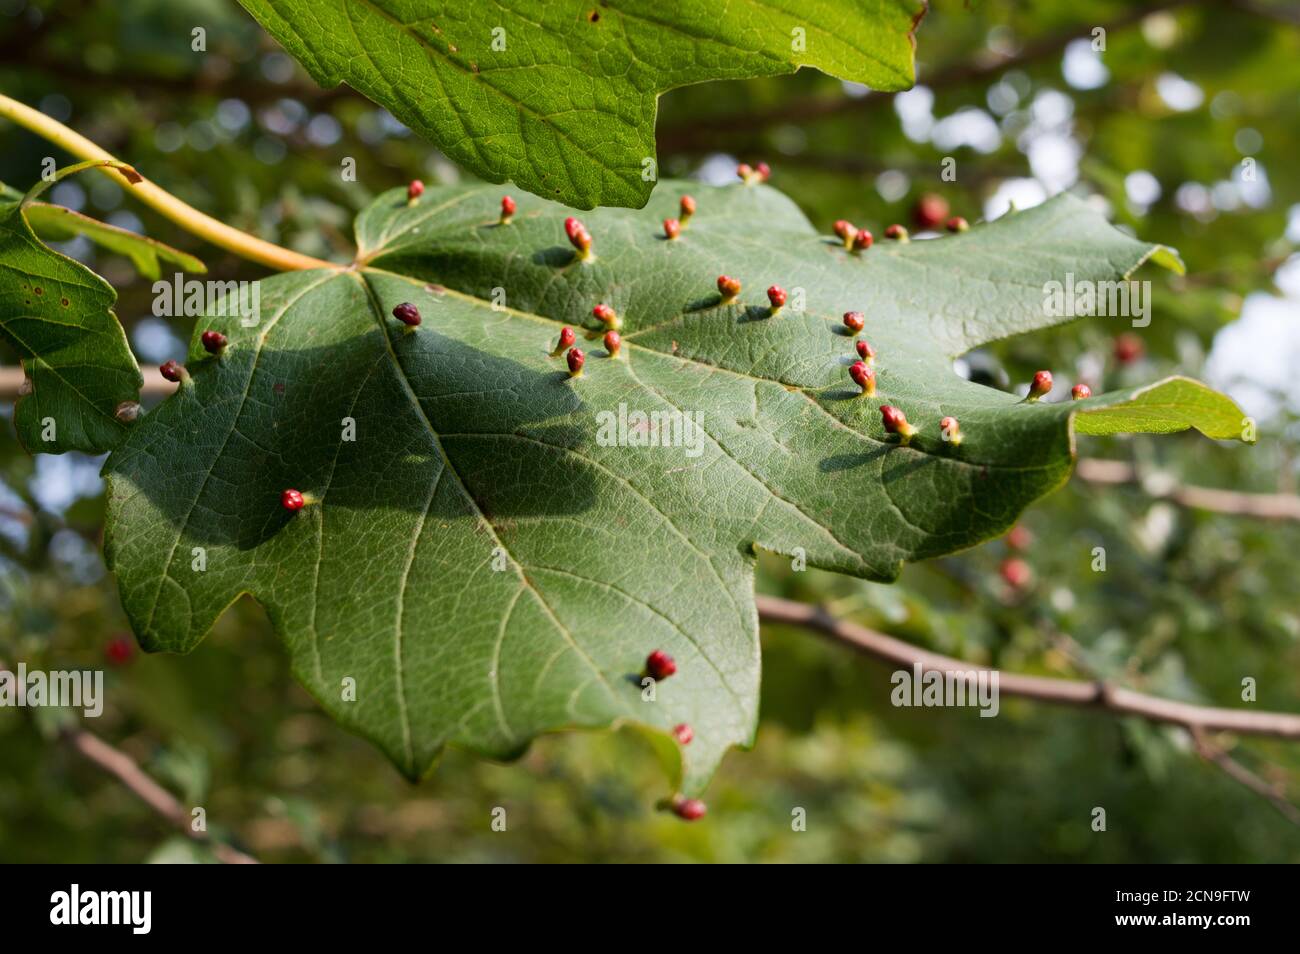 Maple tree infestation by the gall mites causing red bumps on leaves; maple gall mites or eriophyidae Stock Photo